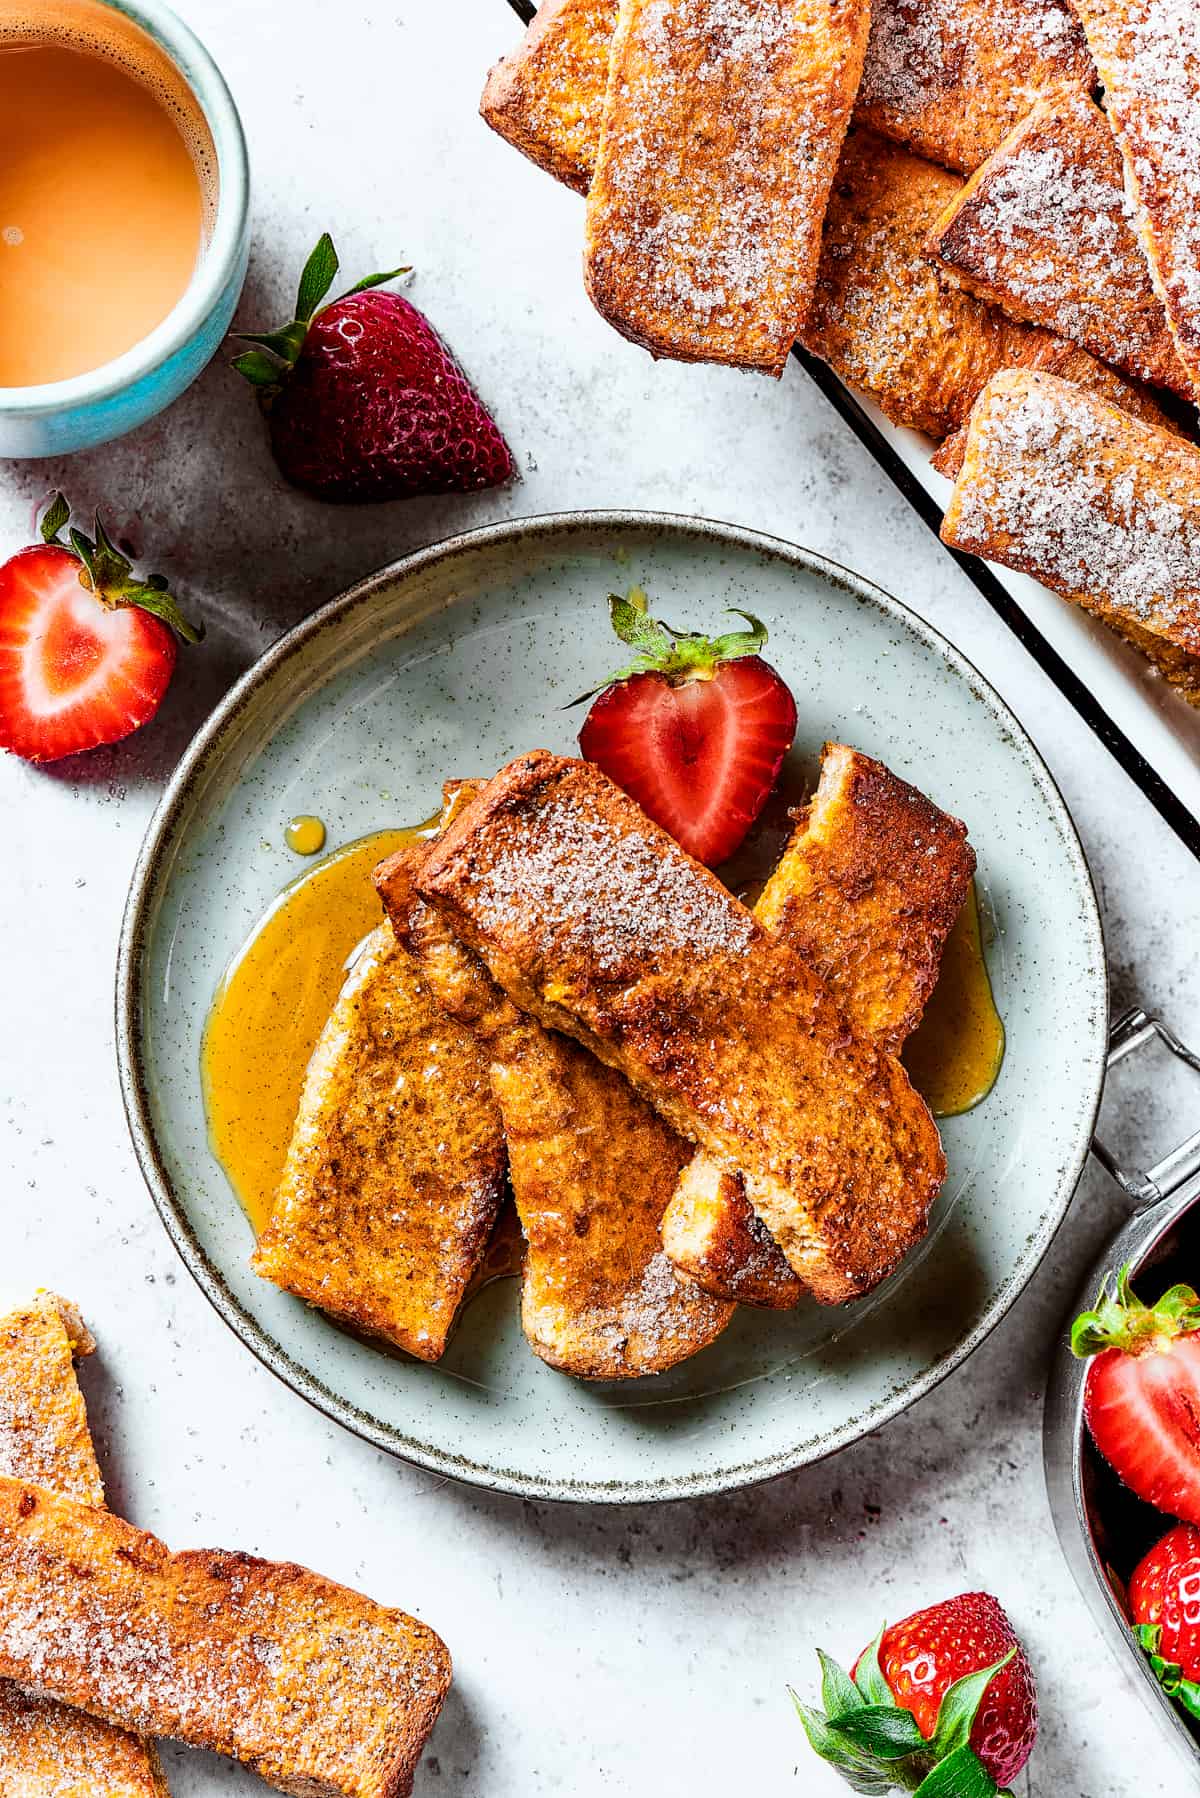 A strawberry-garnished plate of homemade French toast.